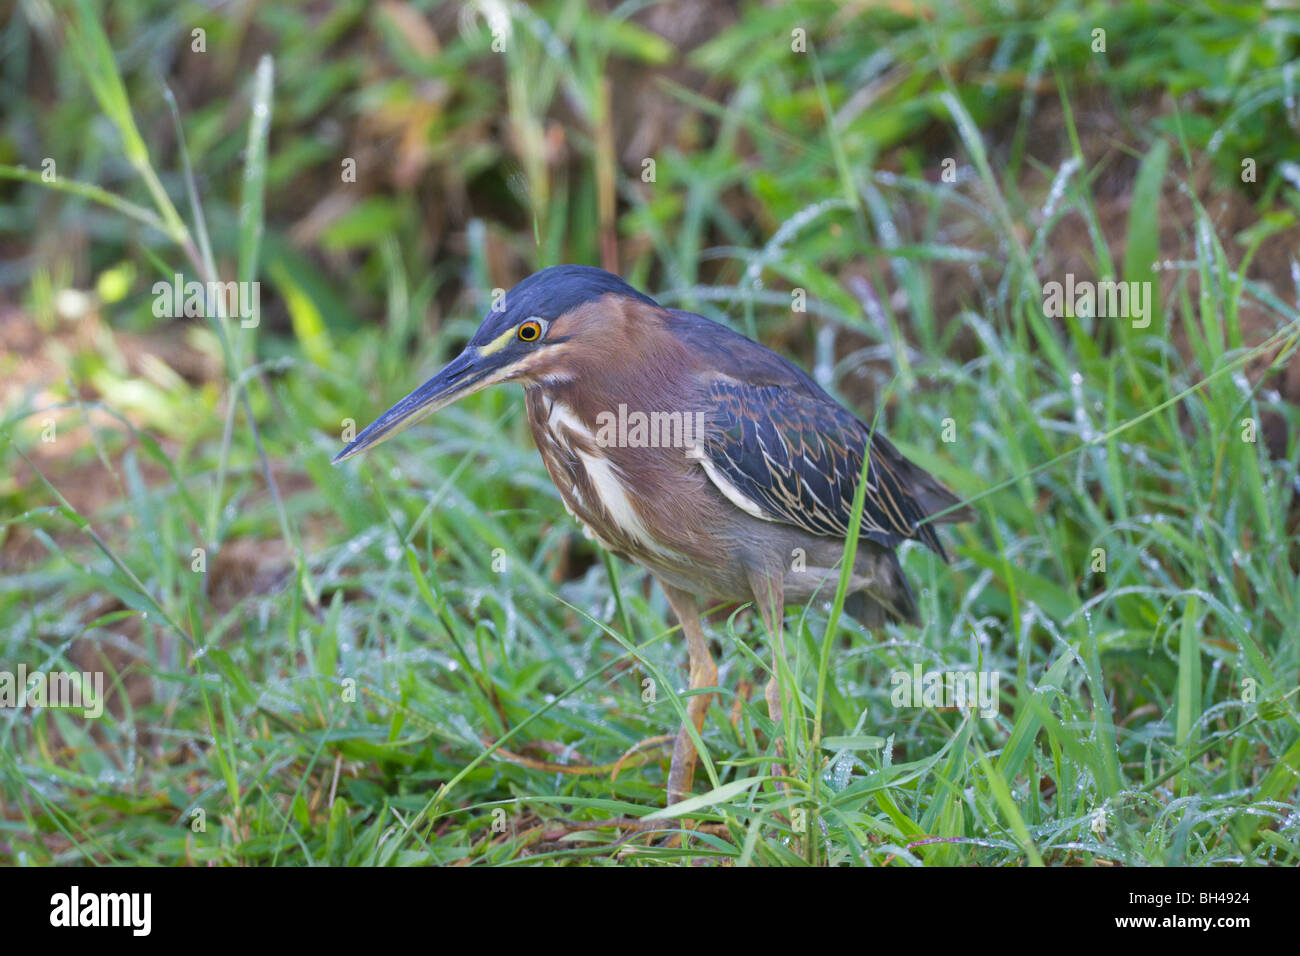 Greenbacked or striated heron (Butorides striatus) in grass along river bank. Stock Photo